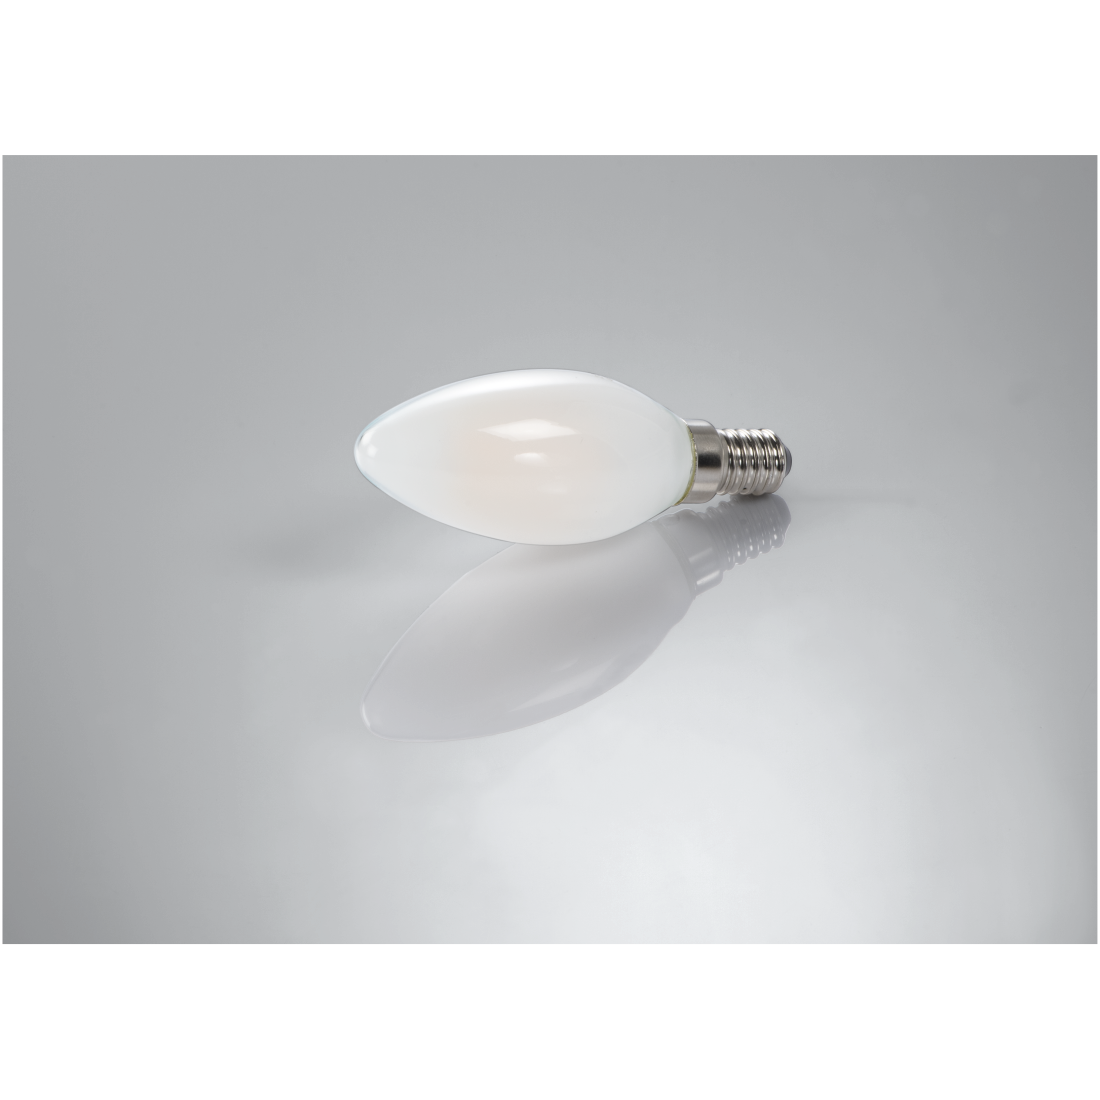 abx3 High-Res Image 3 - Xavax, LED Filament, E14, 470 lm Replaces 40 W, Candle, warm white, matt, RA90, Dimmable